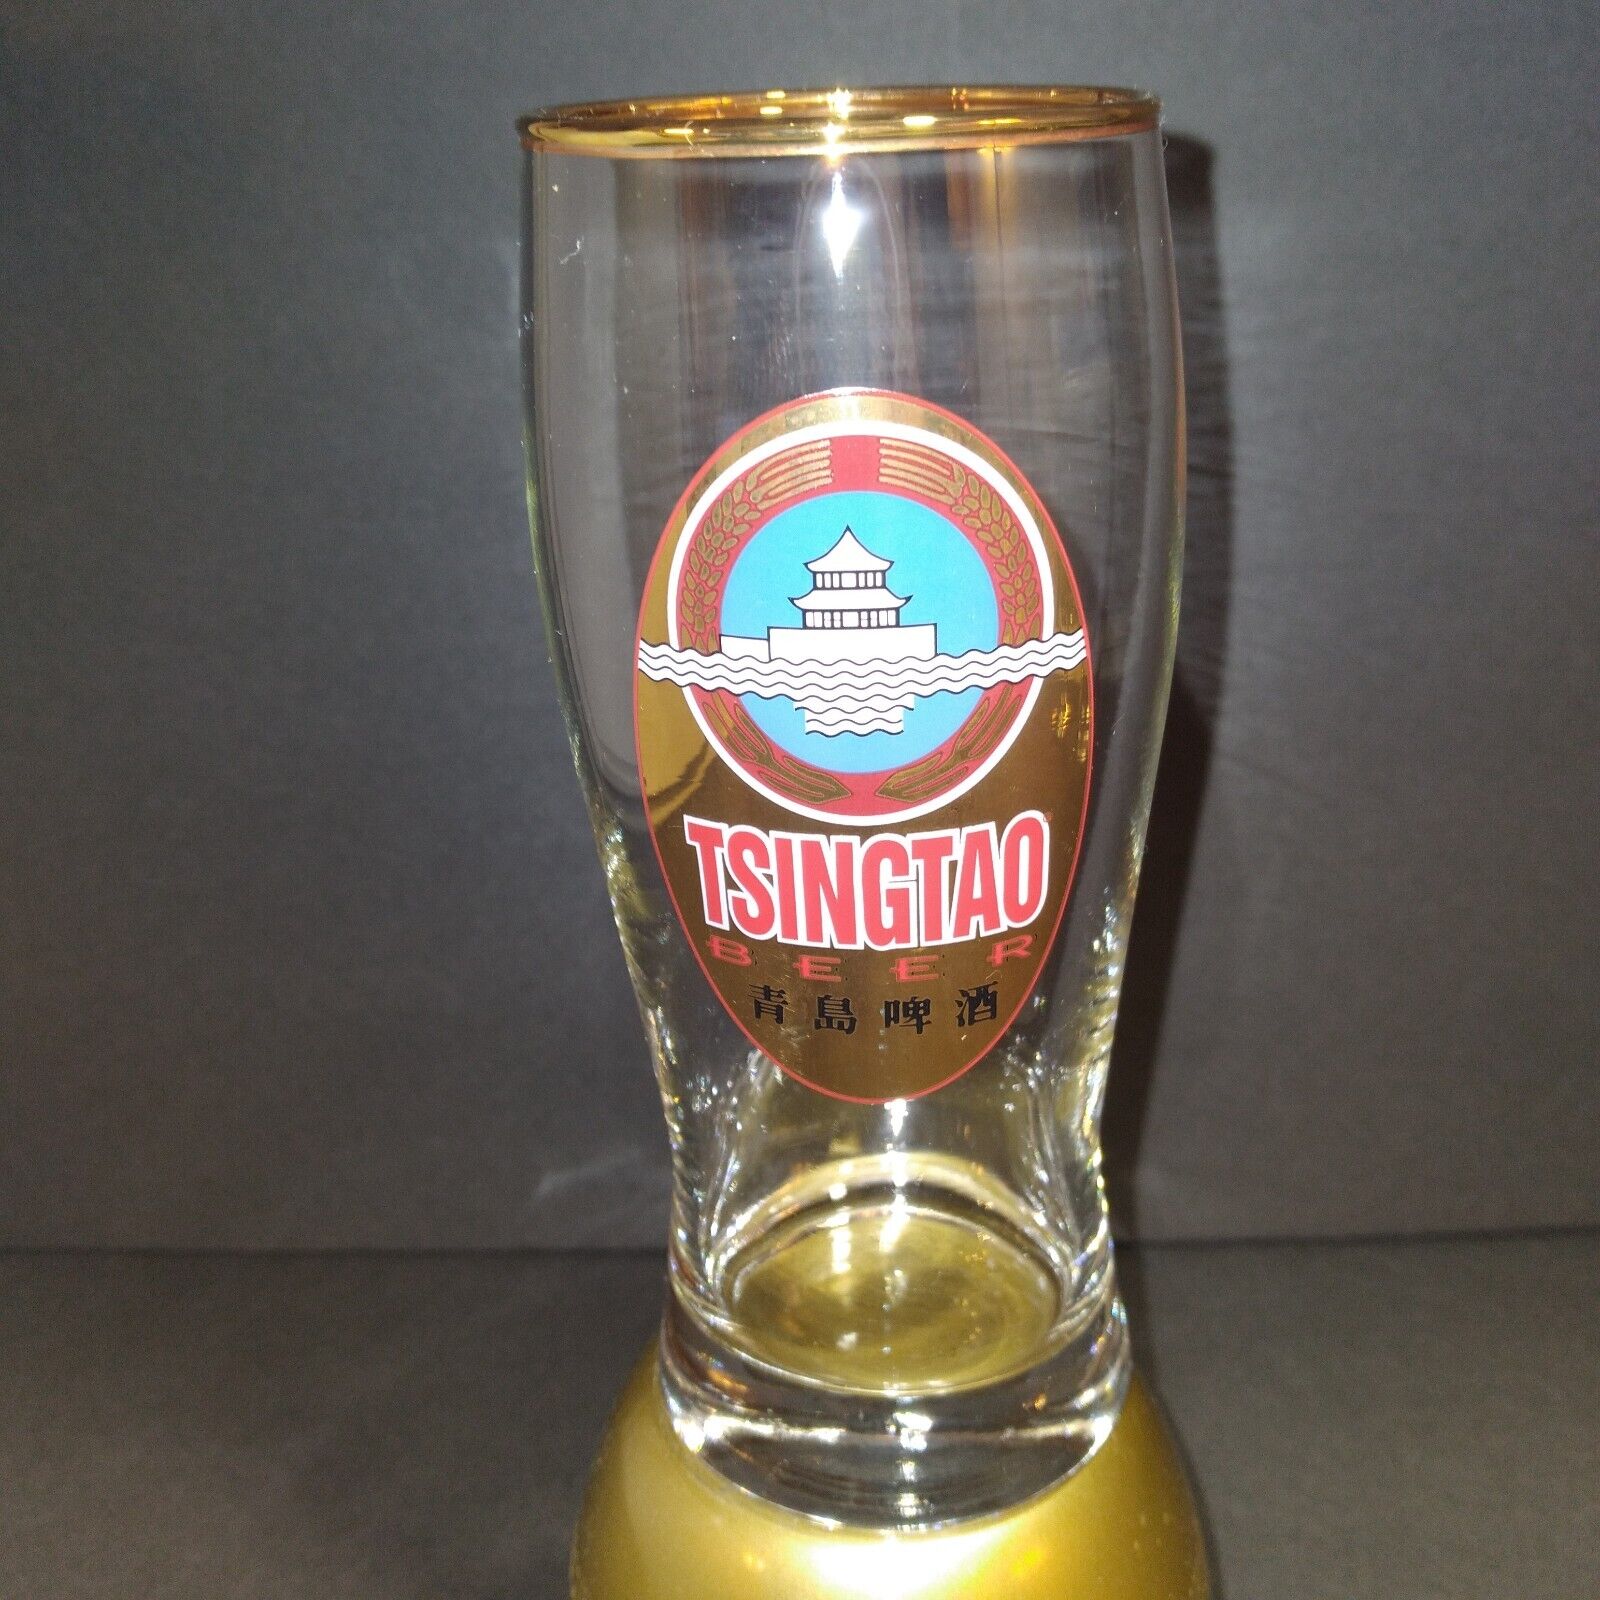 VTG TSINGTAO Beer Glass: Clear-Gold Rim-Colored Logo, China Brewery